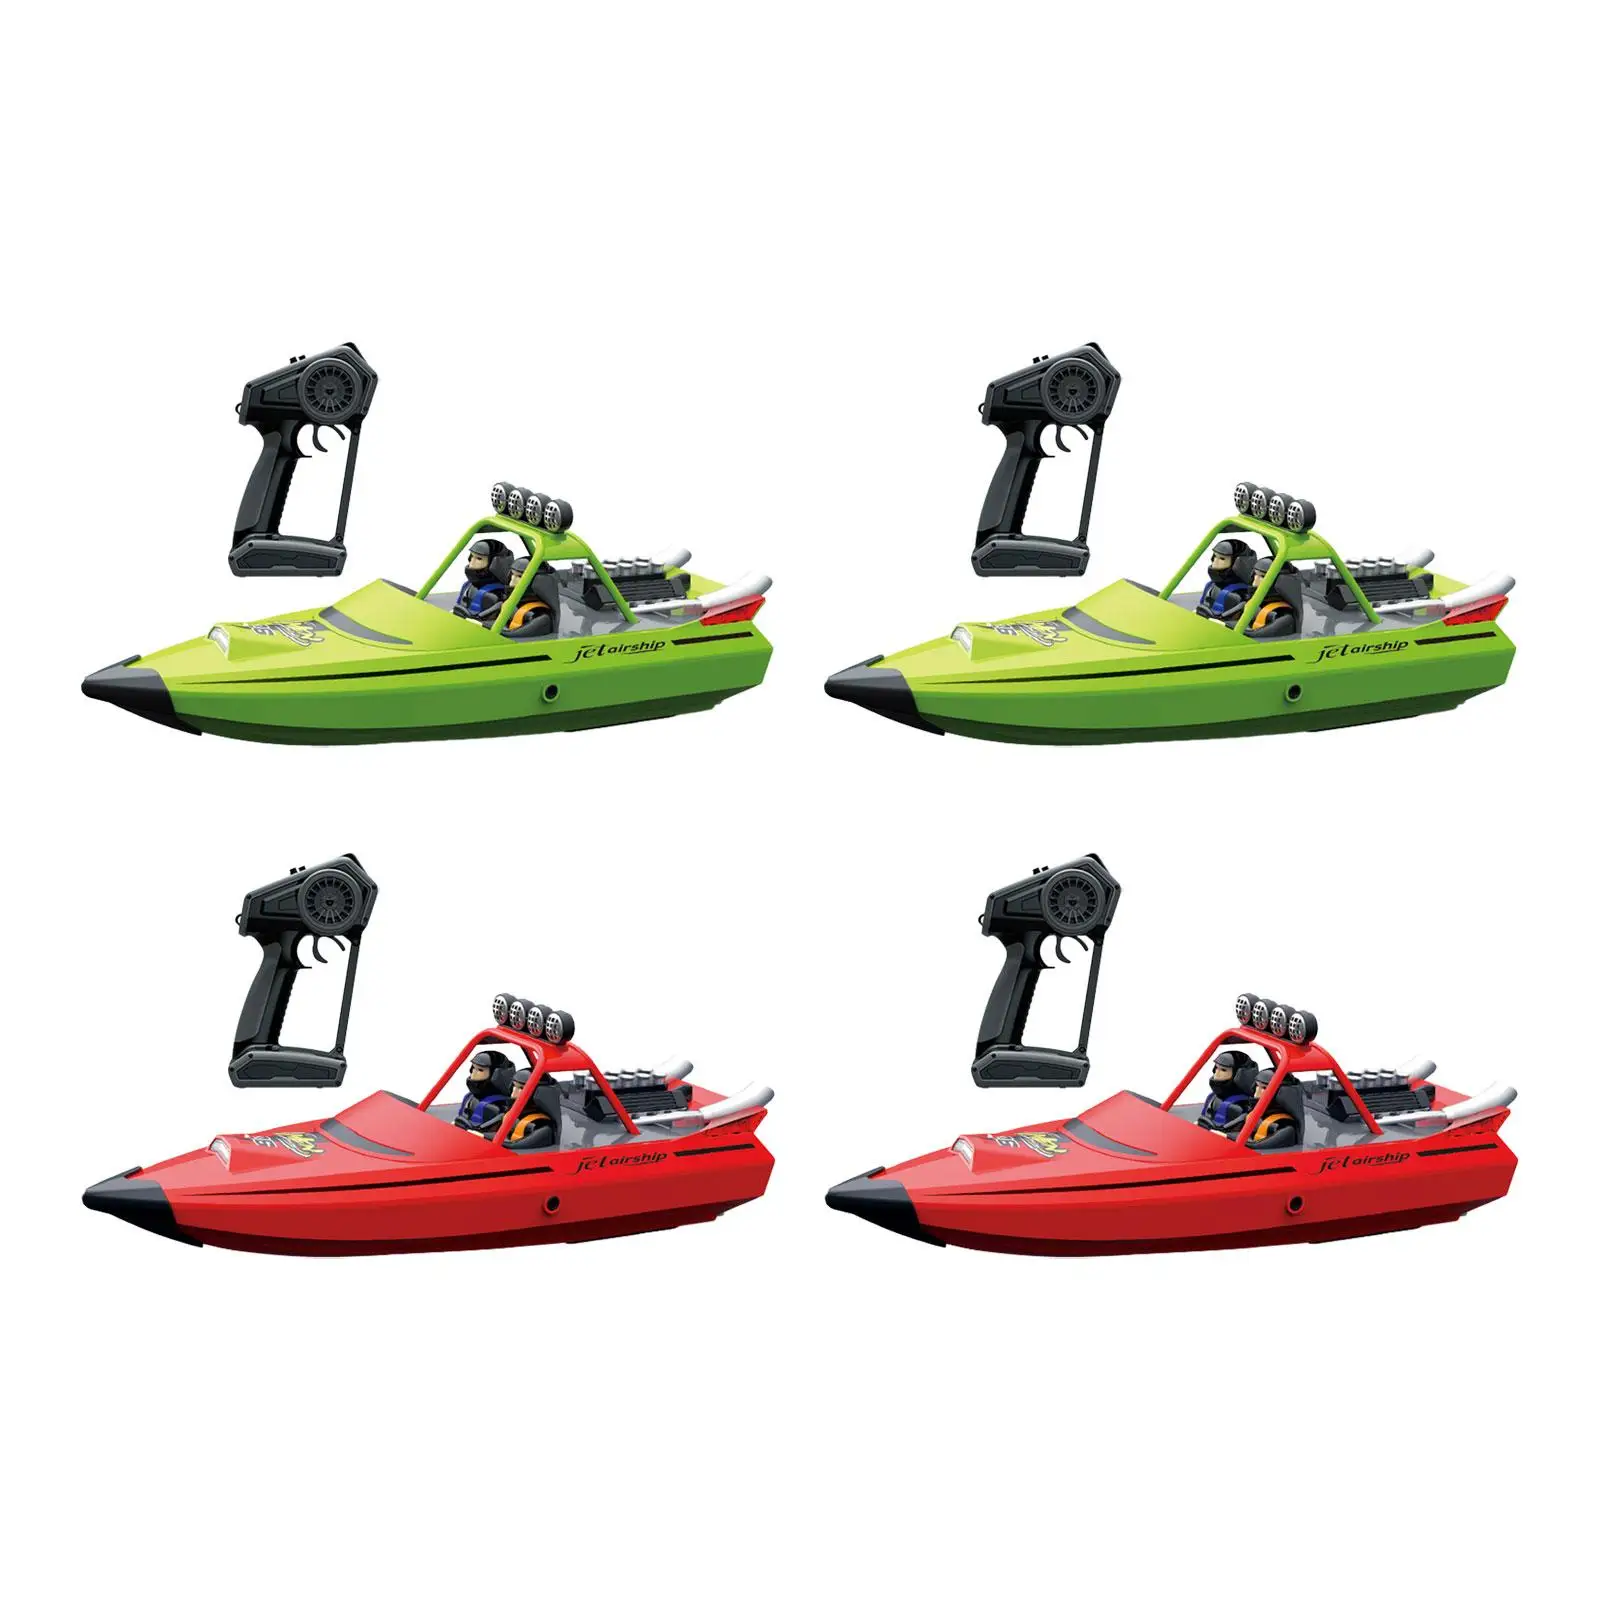 

RC Boat Summer Outdoor Water Toy Self Righting Racing Boat 30km/H for Kids Boys Girls River Water Play Adults Birthday Gifts